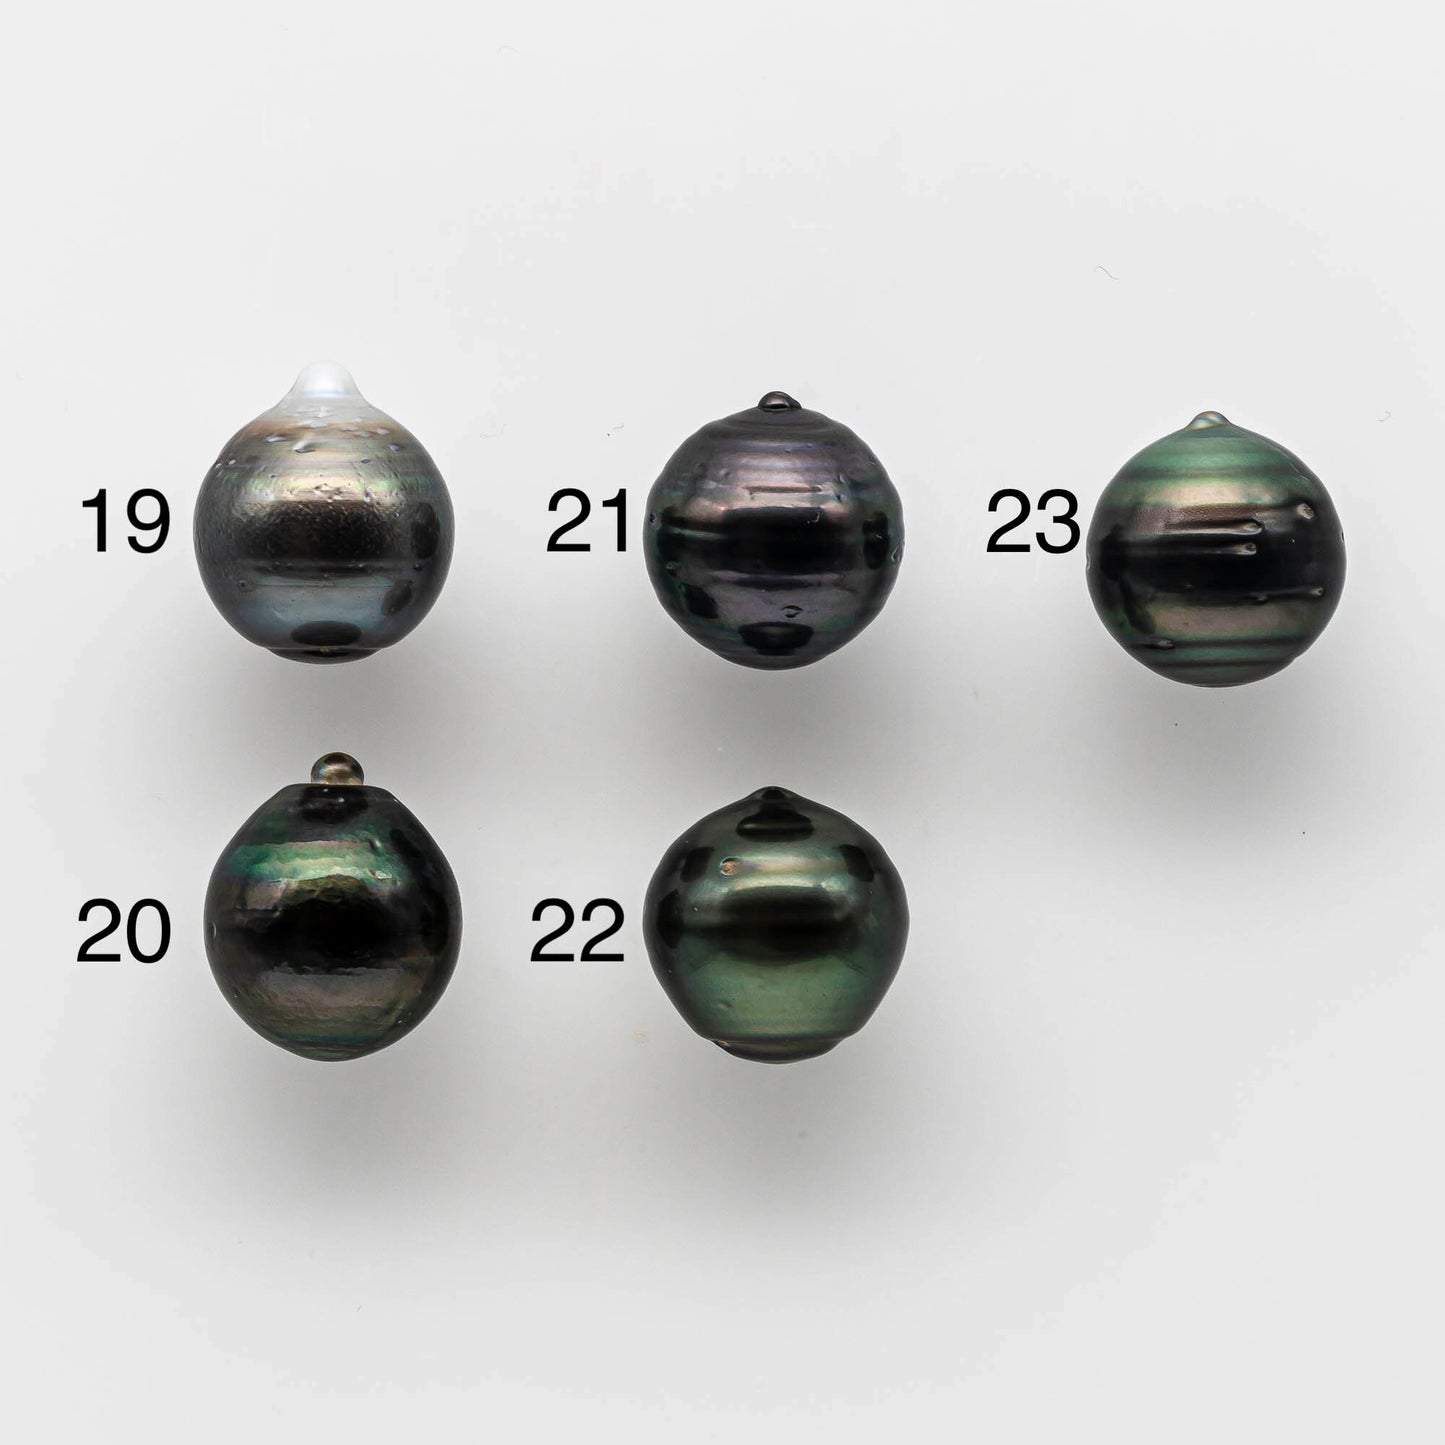 13-14mm Loose Tahitian Pearl Bead Drop Undrilled with Natural Color and High Luster, Half or Full Drilled to Large Hole, SKU # 1662TH